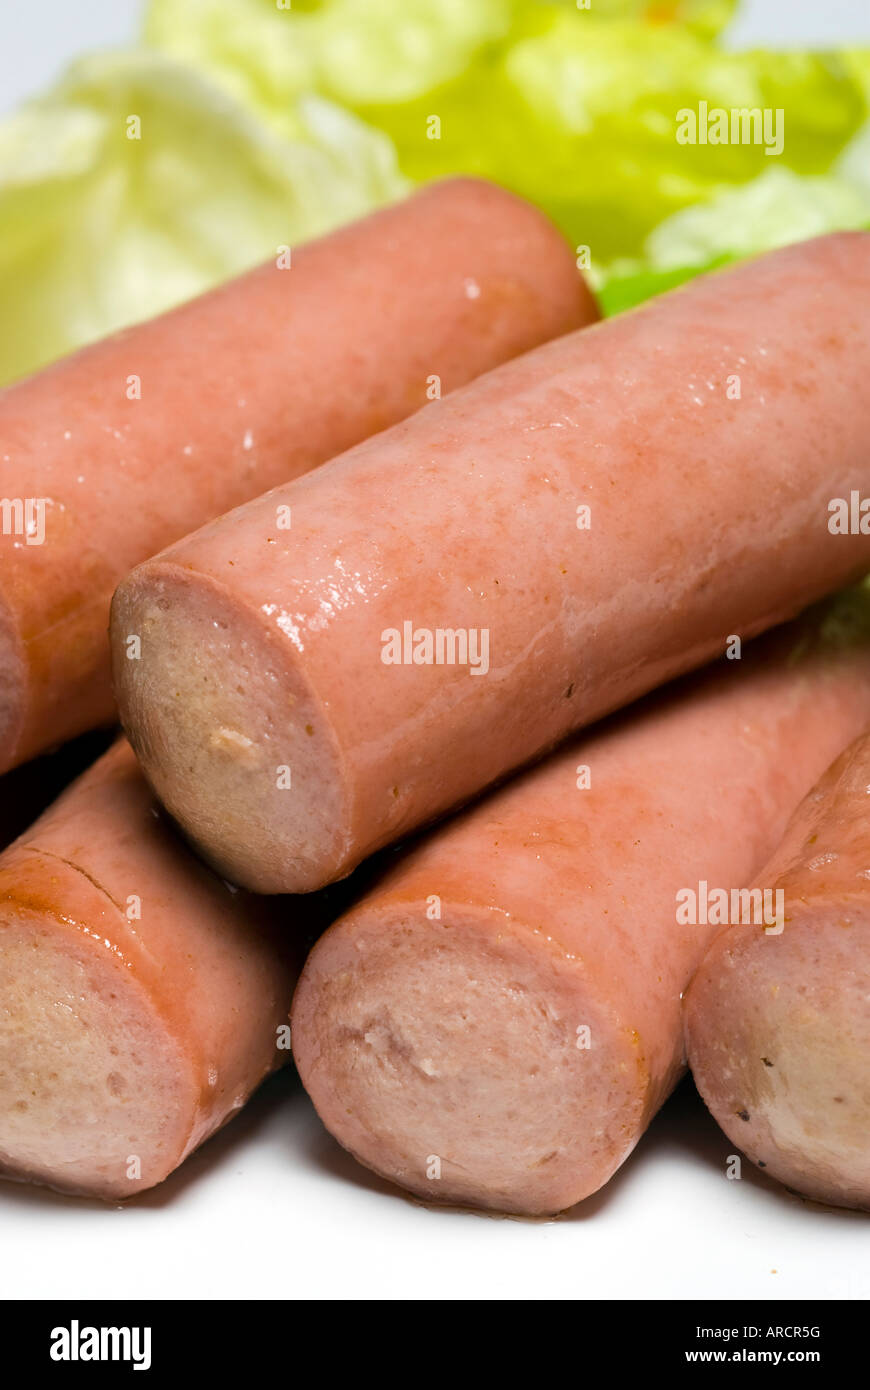 vienna sausage links made with chicken beef and pork in chicken broth Stock Photo